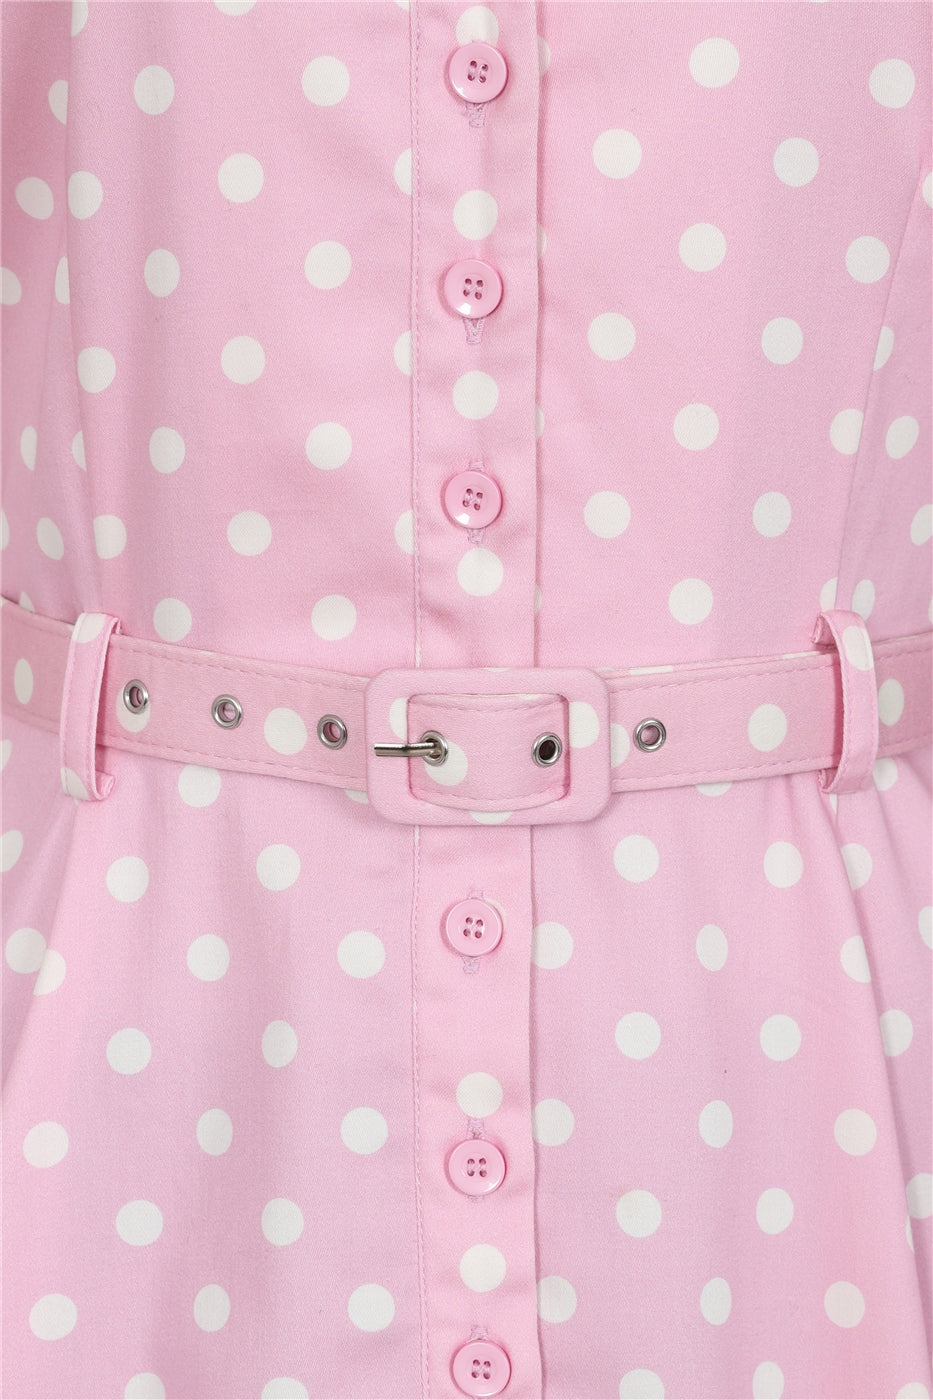 Close up of the pink polka dot Caterina dress front buttons and belt buckle.